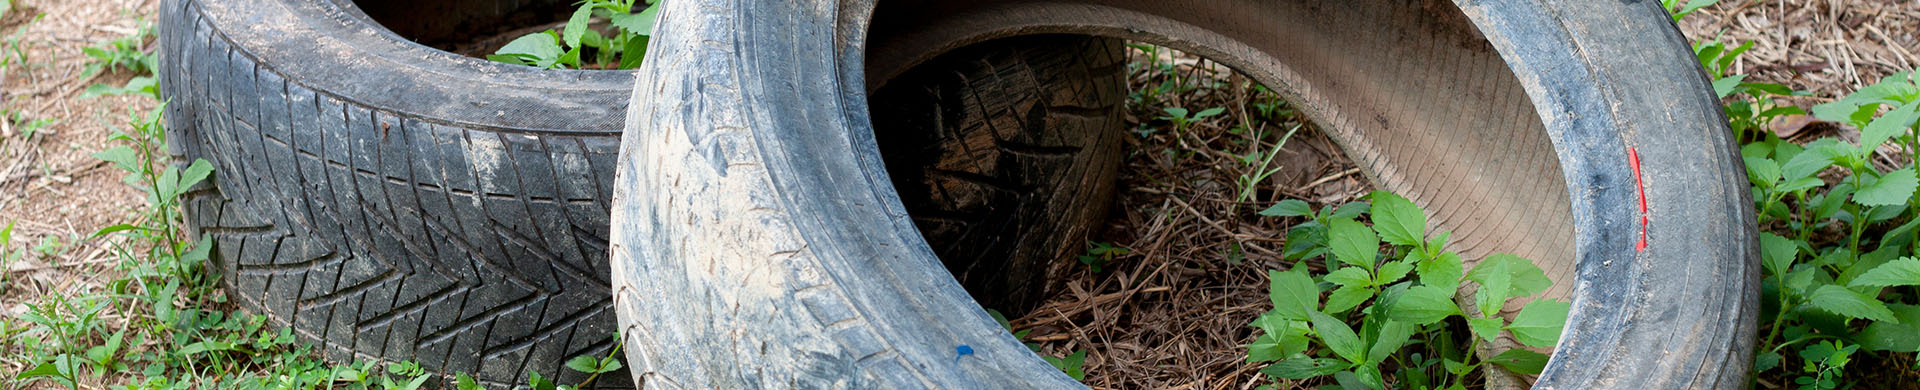 Two Old Tires Laying on the Ground